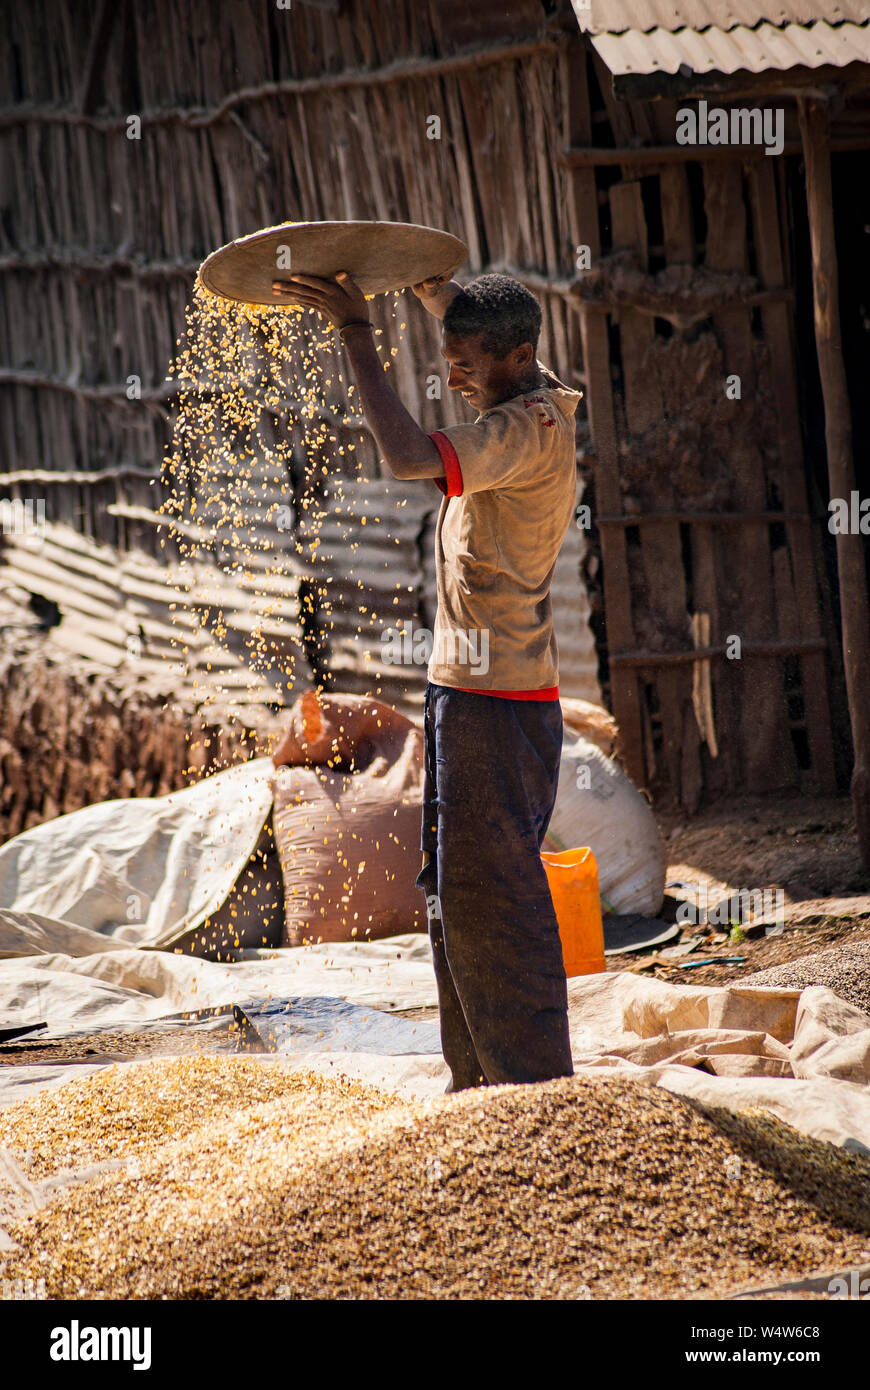 Man separating grain (threshing) for sale in a rural market in Illubabor, Ethiopia Stock Photo